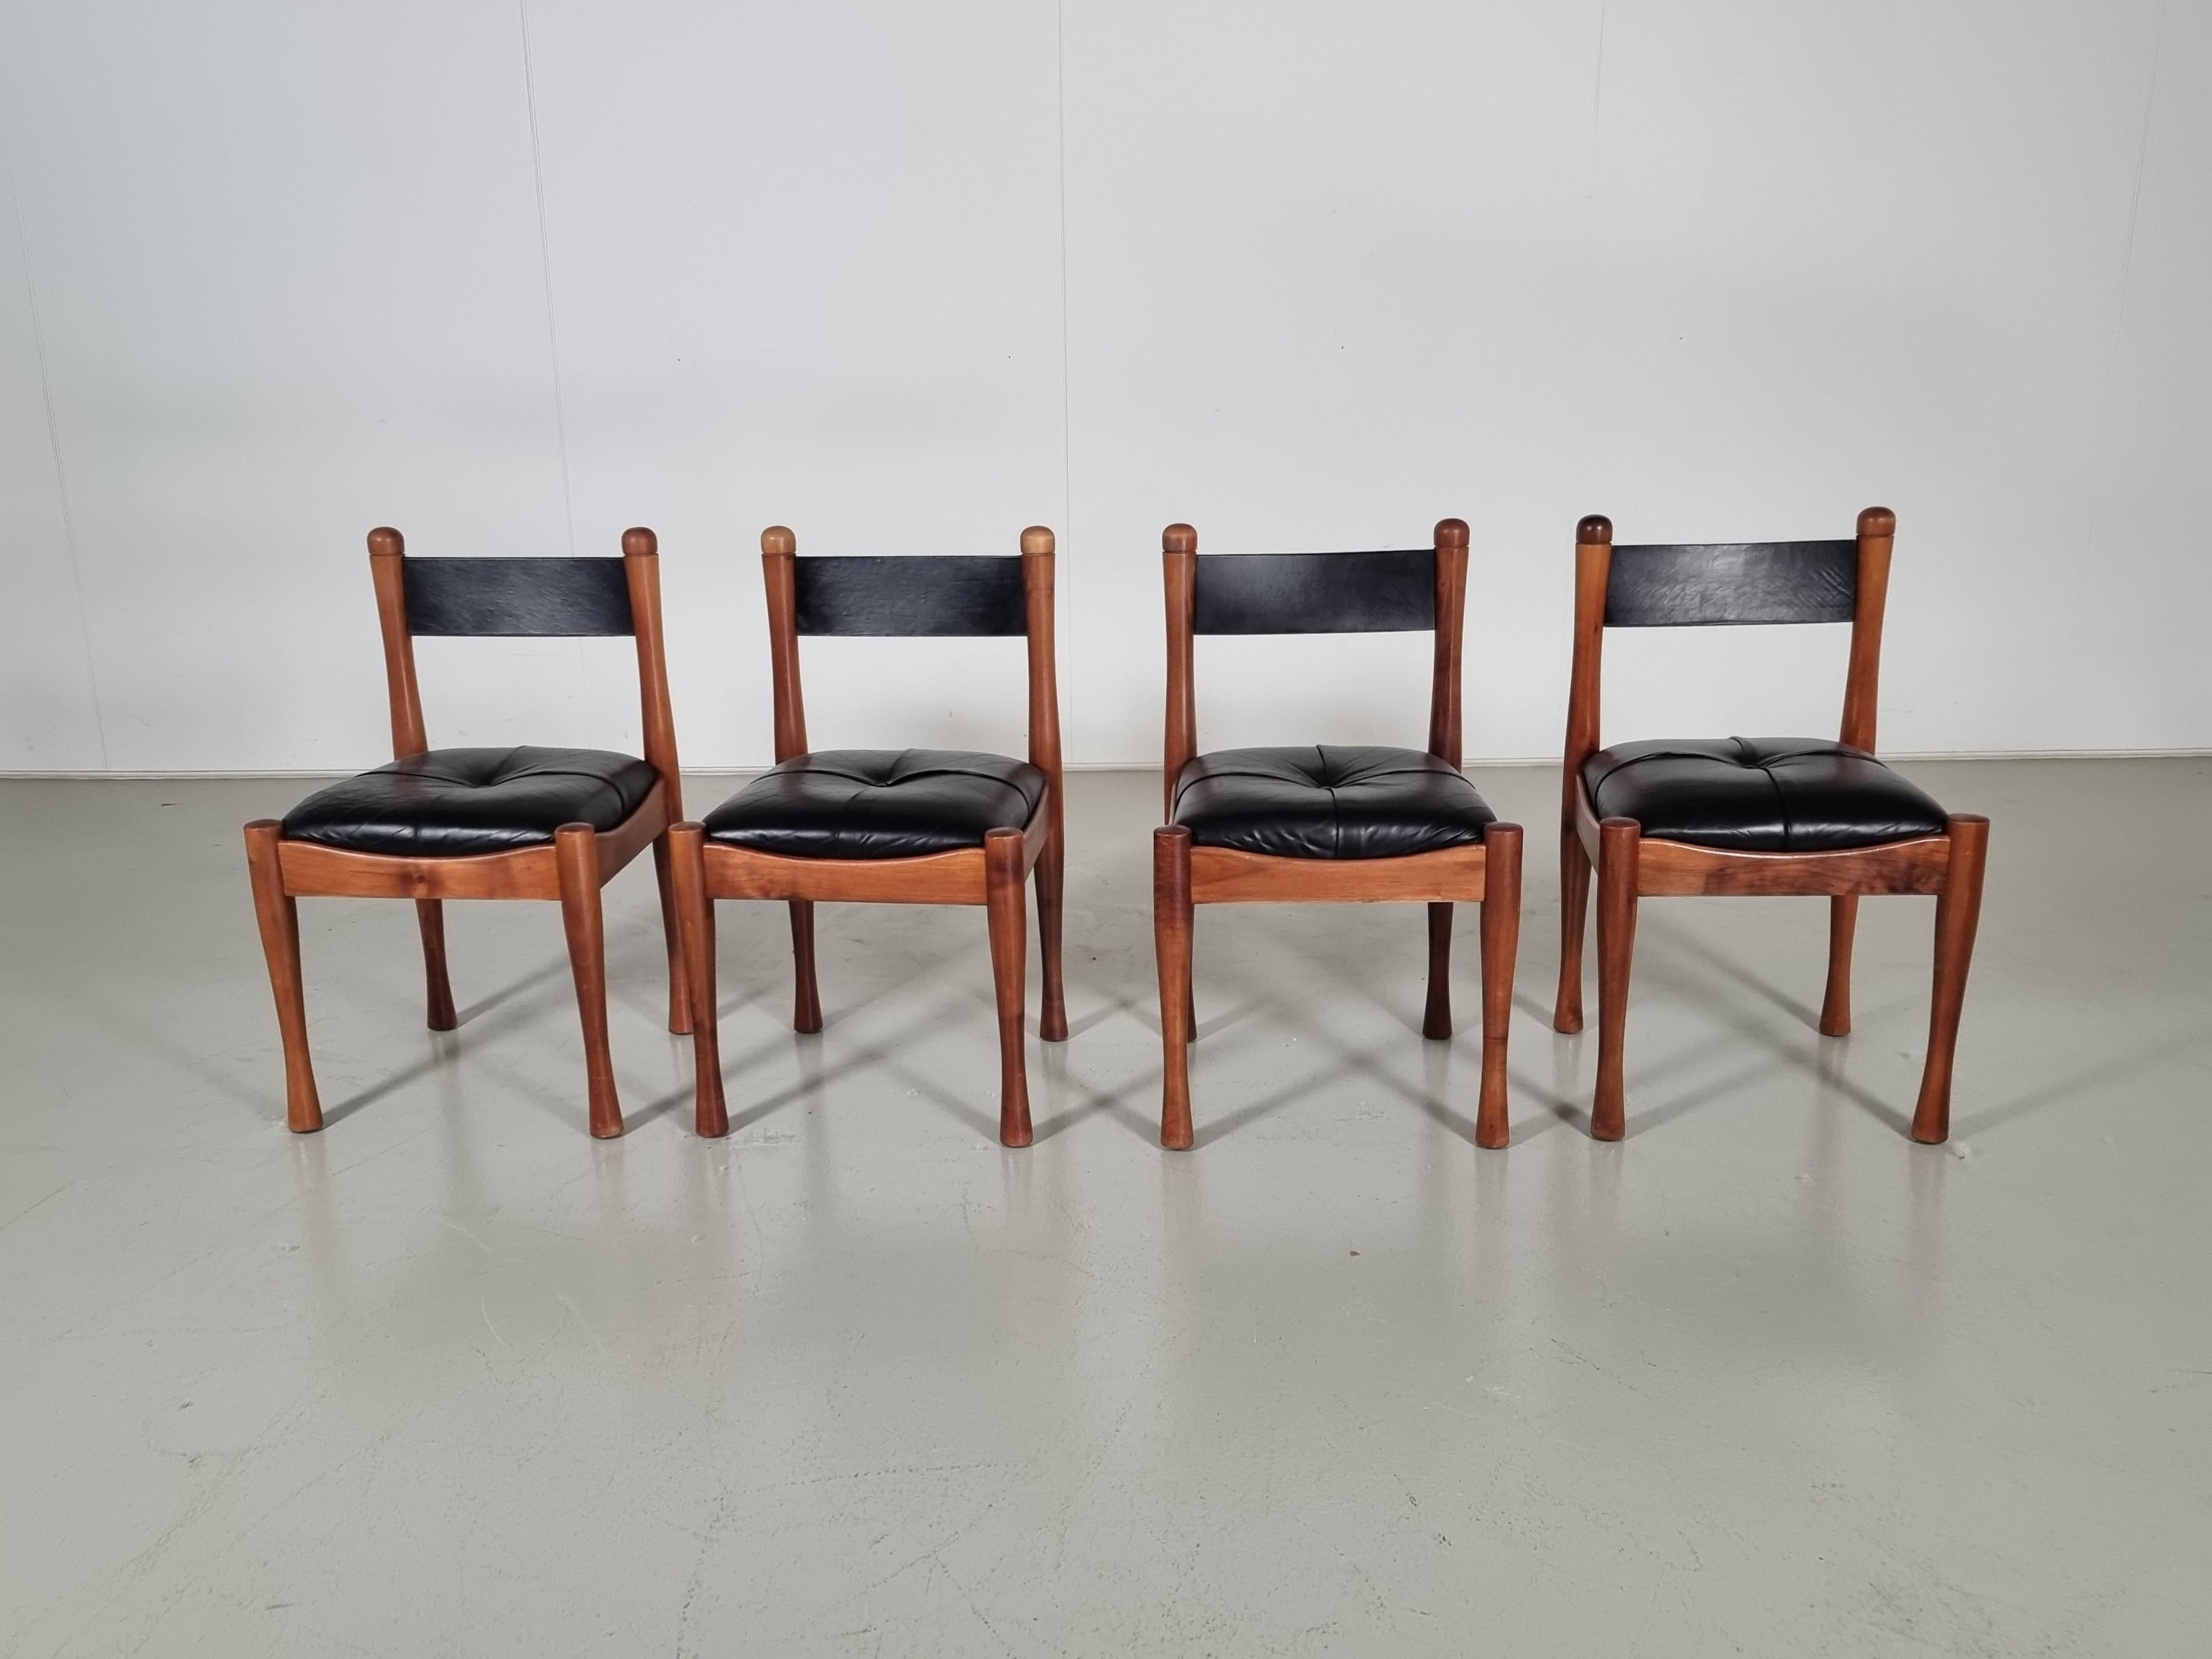 European Set of 4  dining chairs by Silvio Coppola for Bernini, 1960s For Sale